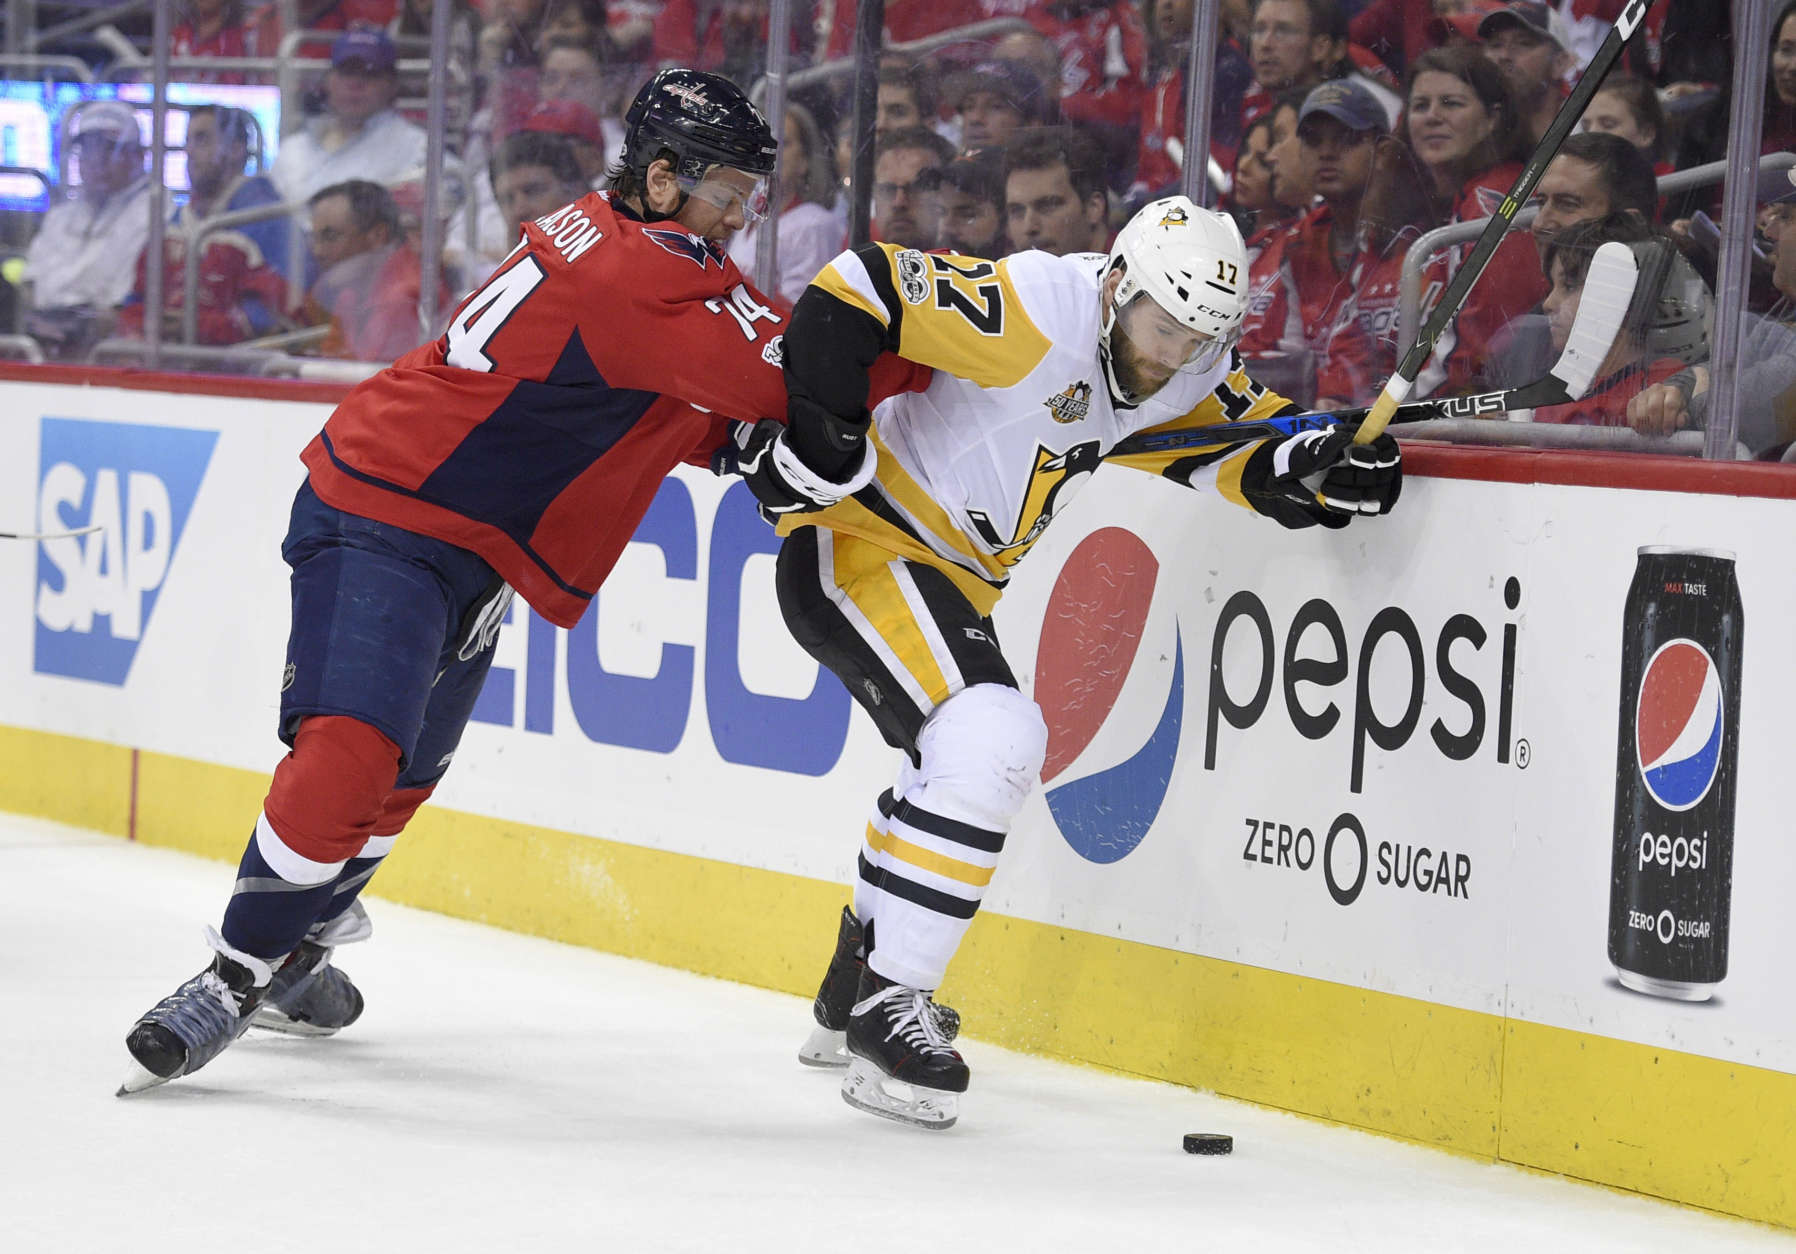 Washington Capitals defenseman John Carlson (74) vies for the puck against Pittsburgh Penguins right wing Bryan Rust (17) during the first period of Game 1 in an NHL hockey Stanley Cup second-round playoff series, Thursday, April 27, 2017, in Washington. (AP Photo/Nick Wass)